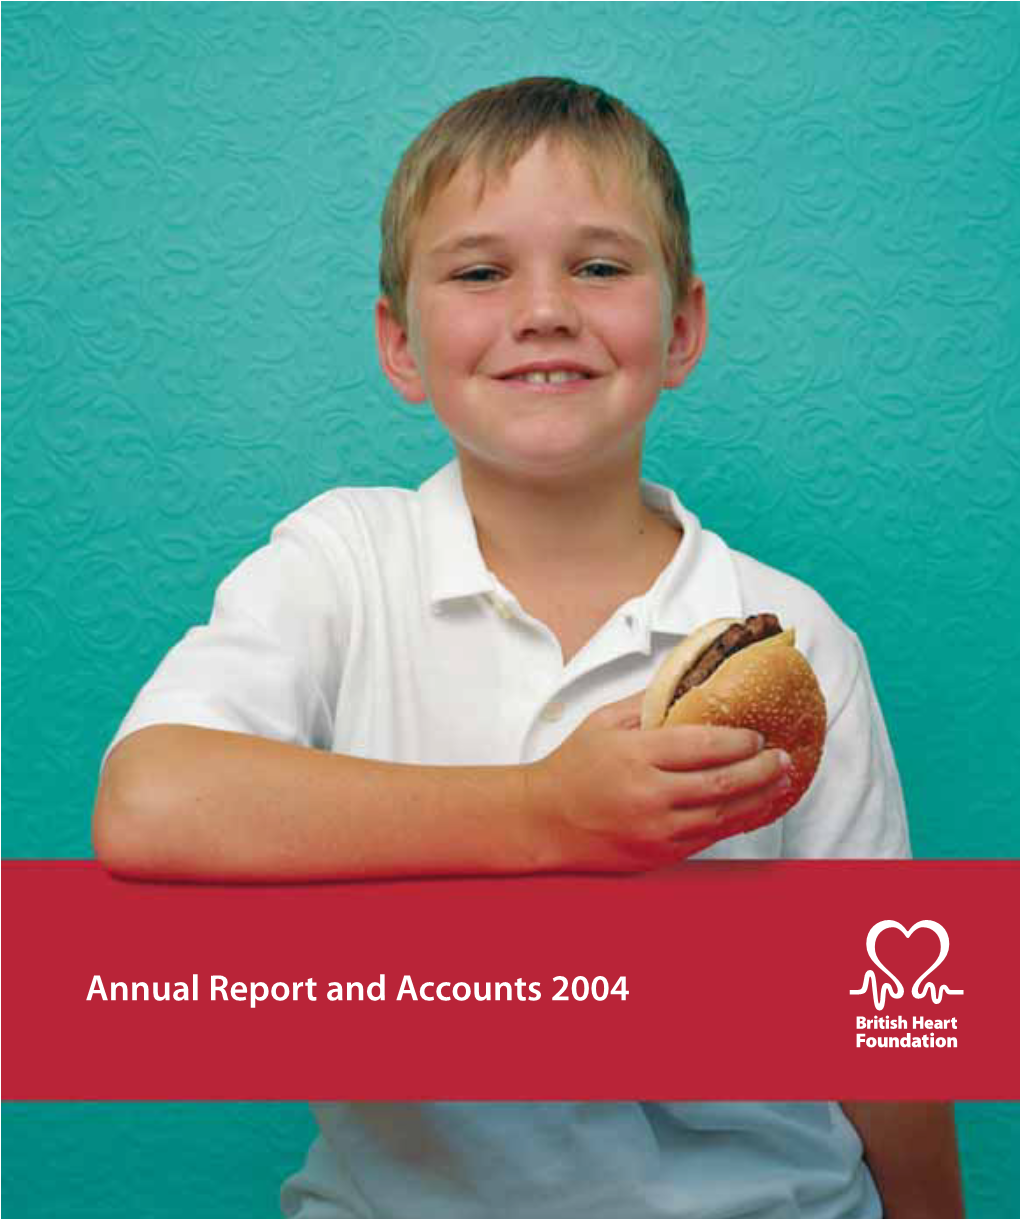 BHF Annual Review Ready For